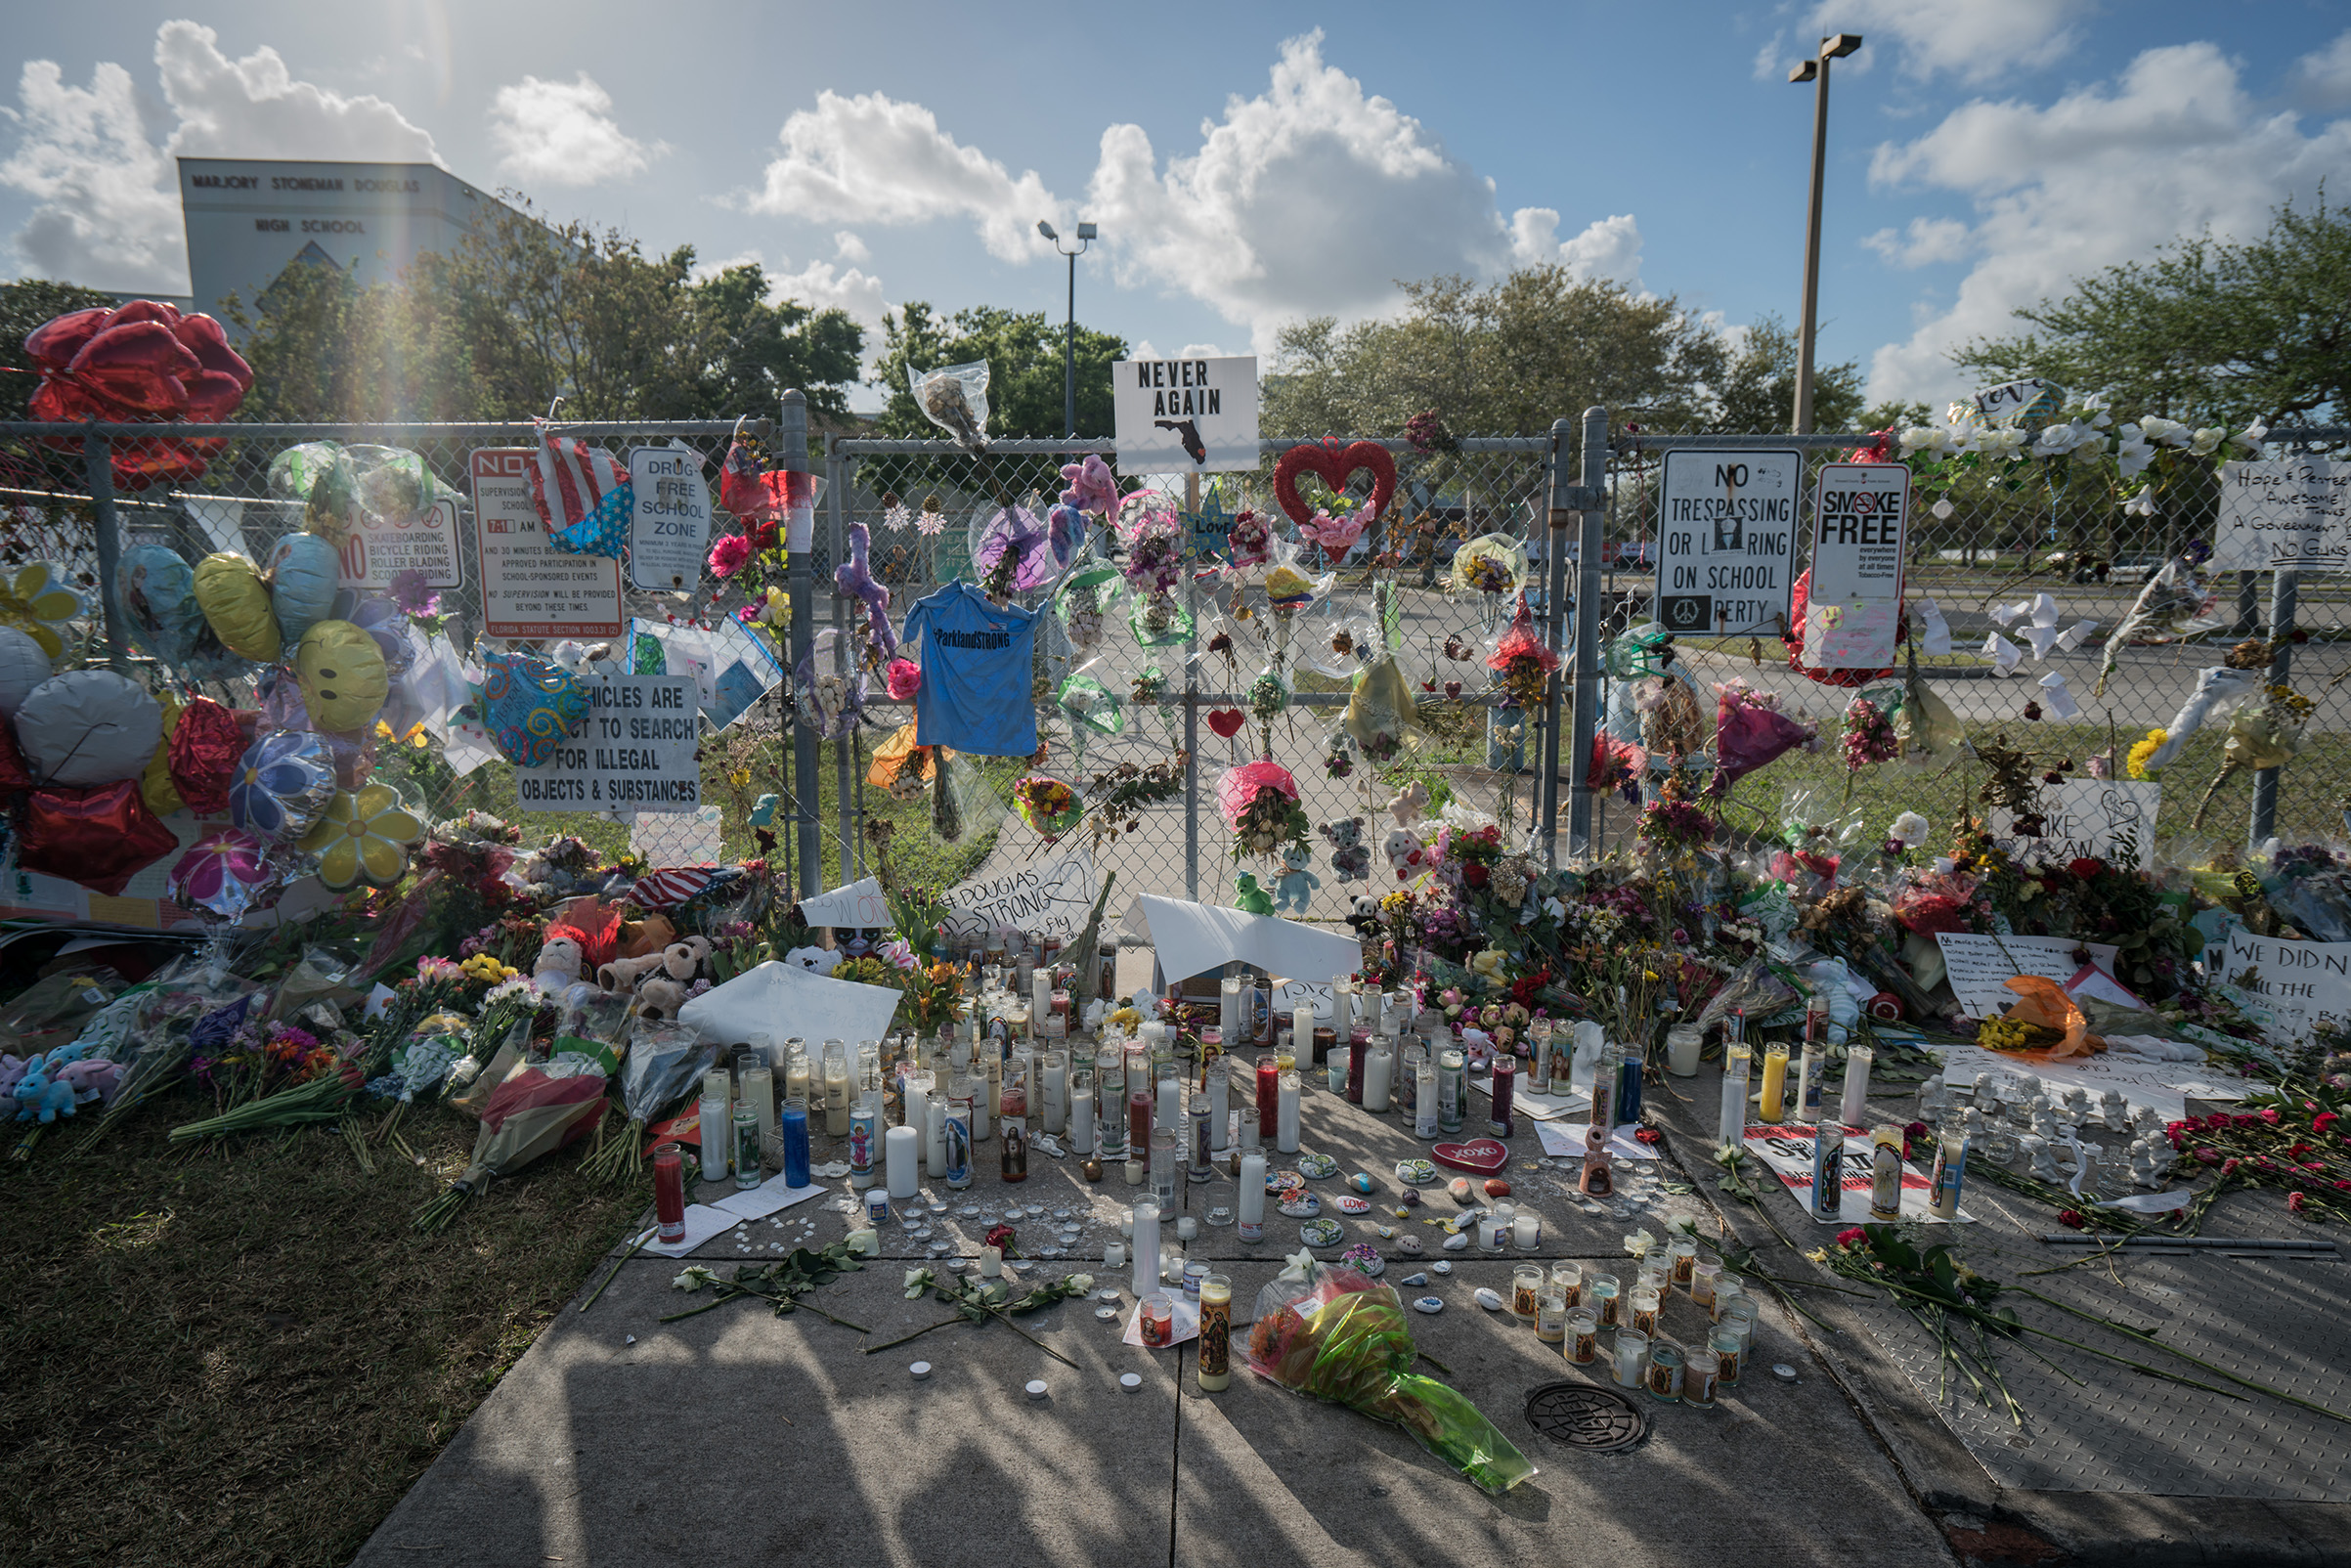 A makeshift memorial at Marjory Stoneman Douglas High School in Parkland, Fla. on Feb. 25, 2018. (Giles Clarke—Getty Images)